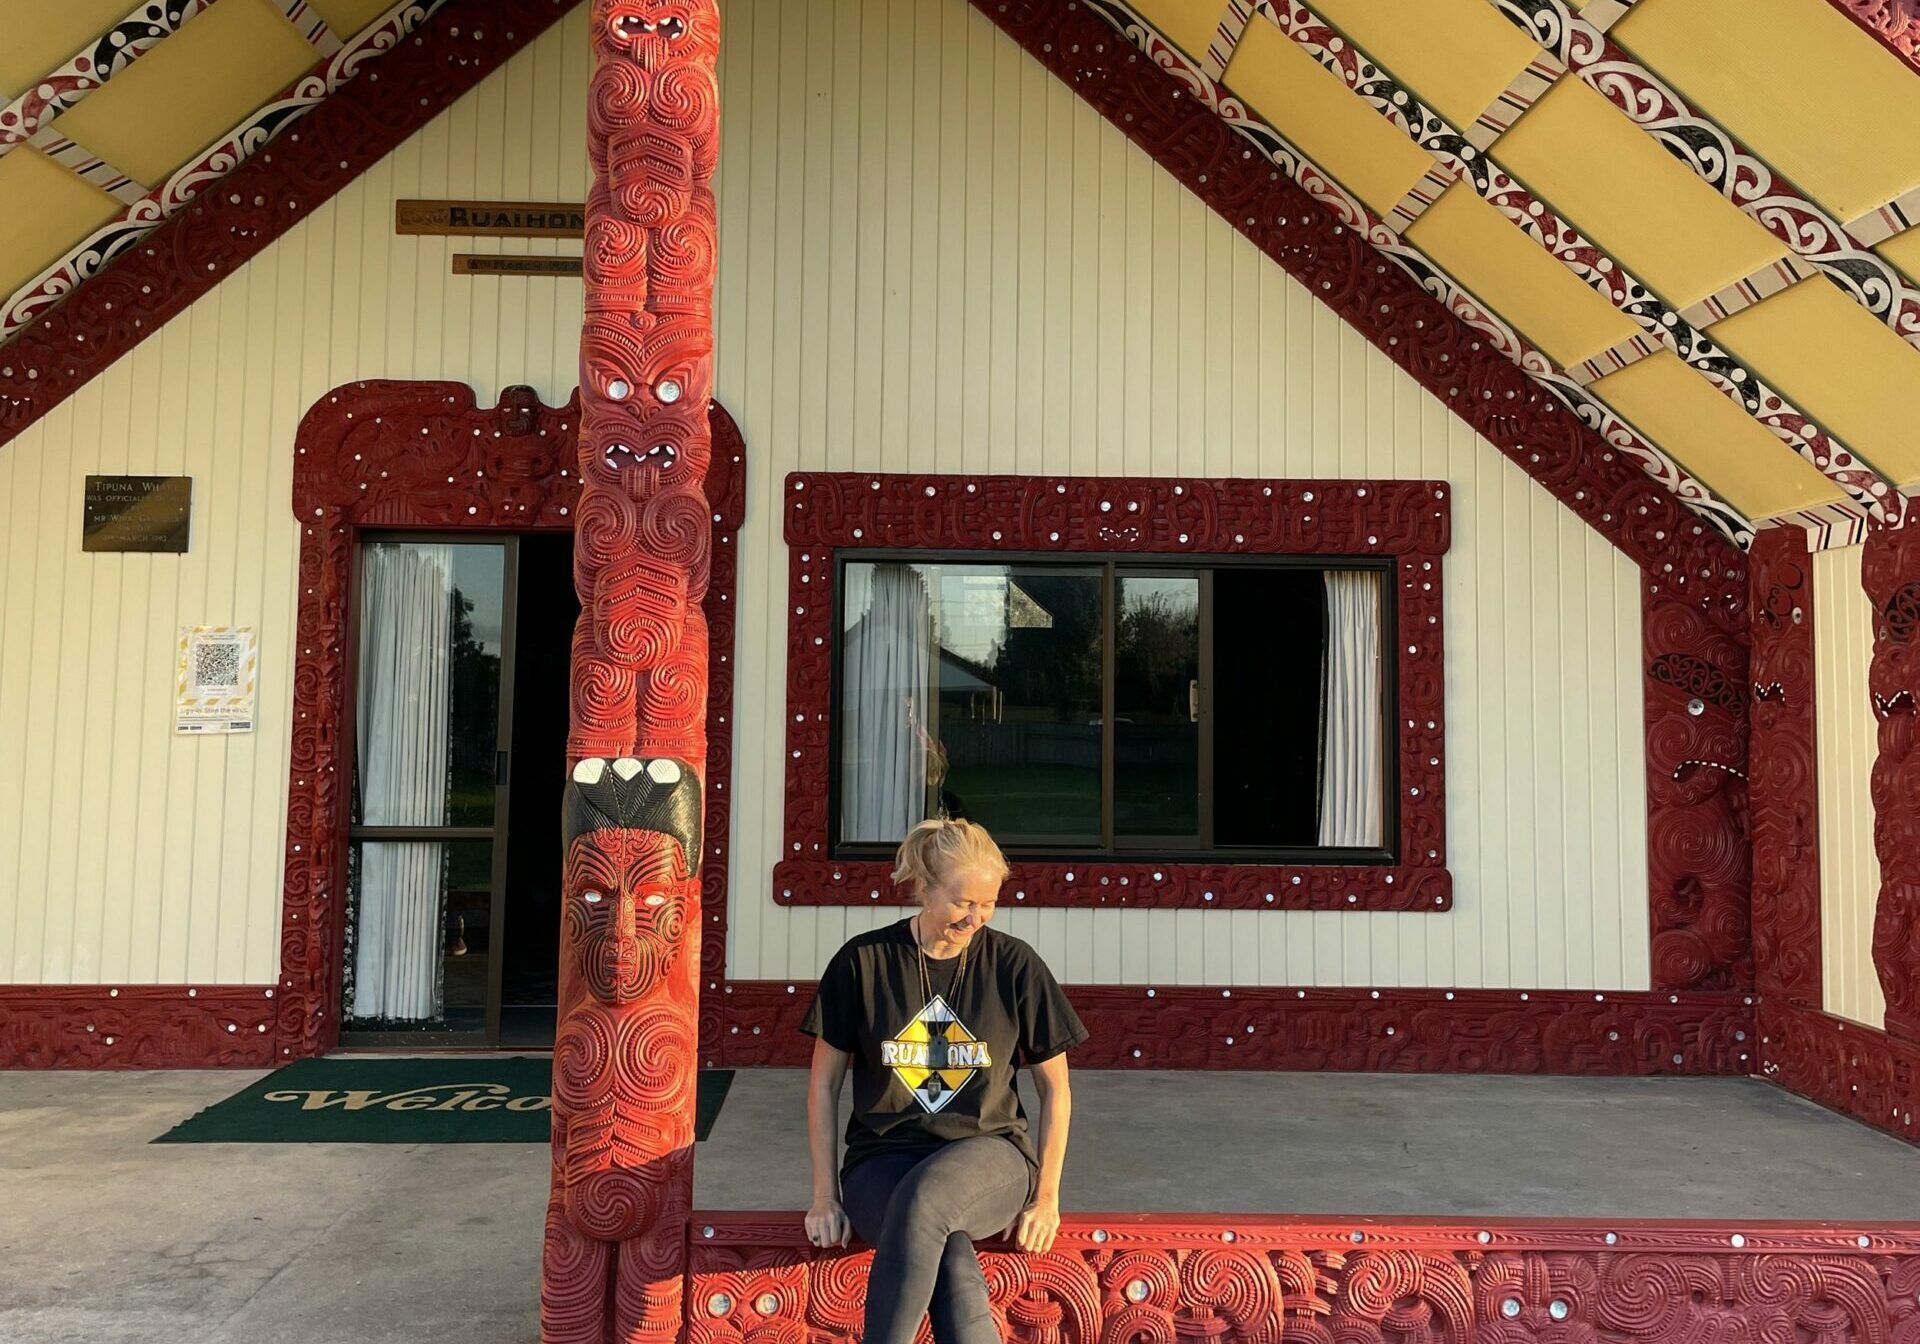 In Te Teko, Sara is known by her friends and whānau as Hera or, fondly, The Blonde. This image of Sara sitting in front of the wharenui of her marae - Ruaihona - in Te Teko was taken by Lesley Savage.